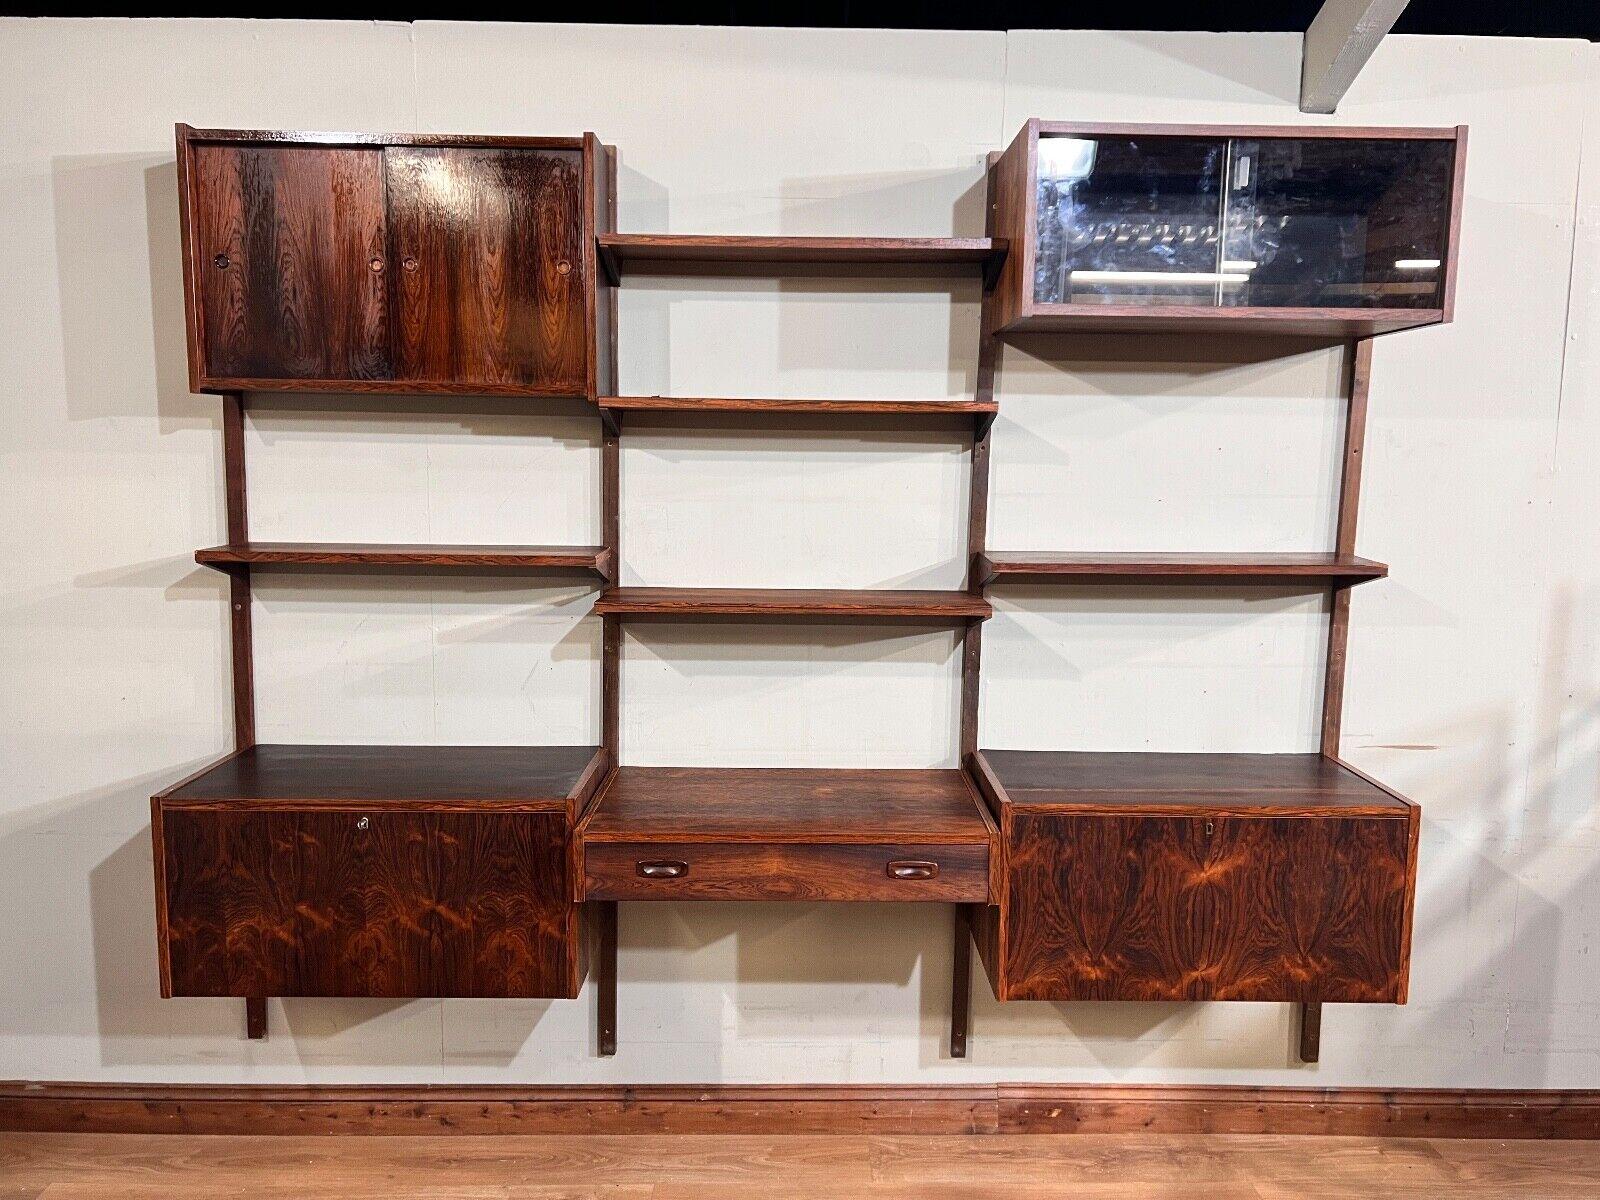 On trend Mid Century teak Danish wall unit by Poul Cadovius
Great piece that hangs to the wall and features a desk, cabinets and numerous shelves
Circa 1960 on this vintage piece of furniture
Poul Cadovius (1911 - 2011) was one of the most colourful